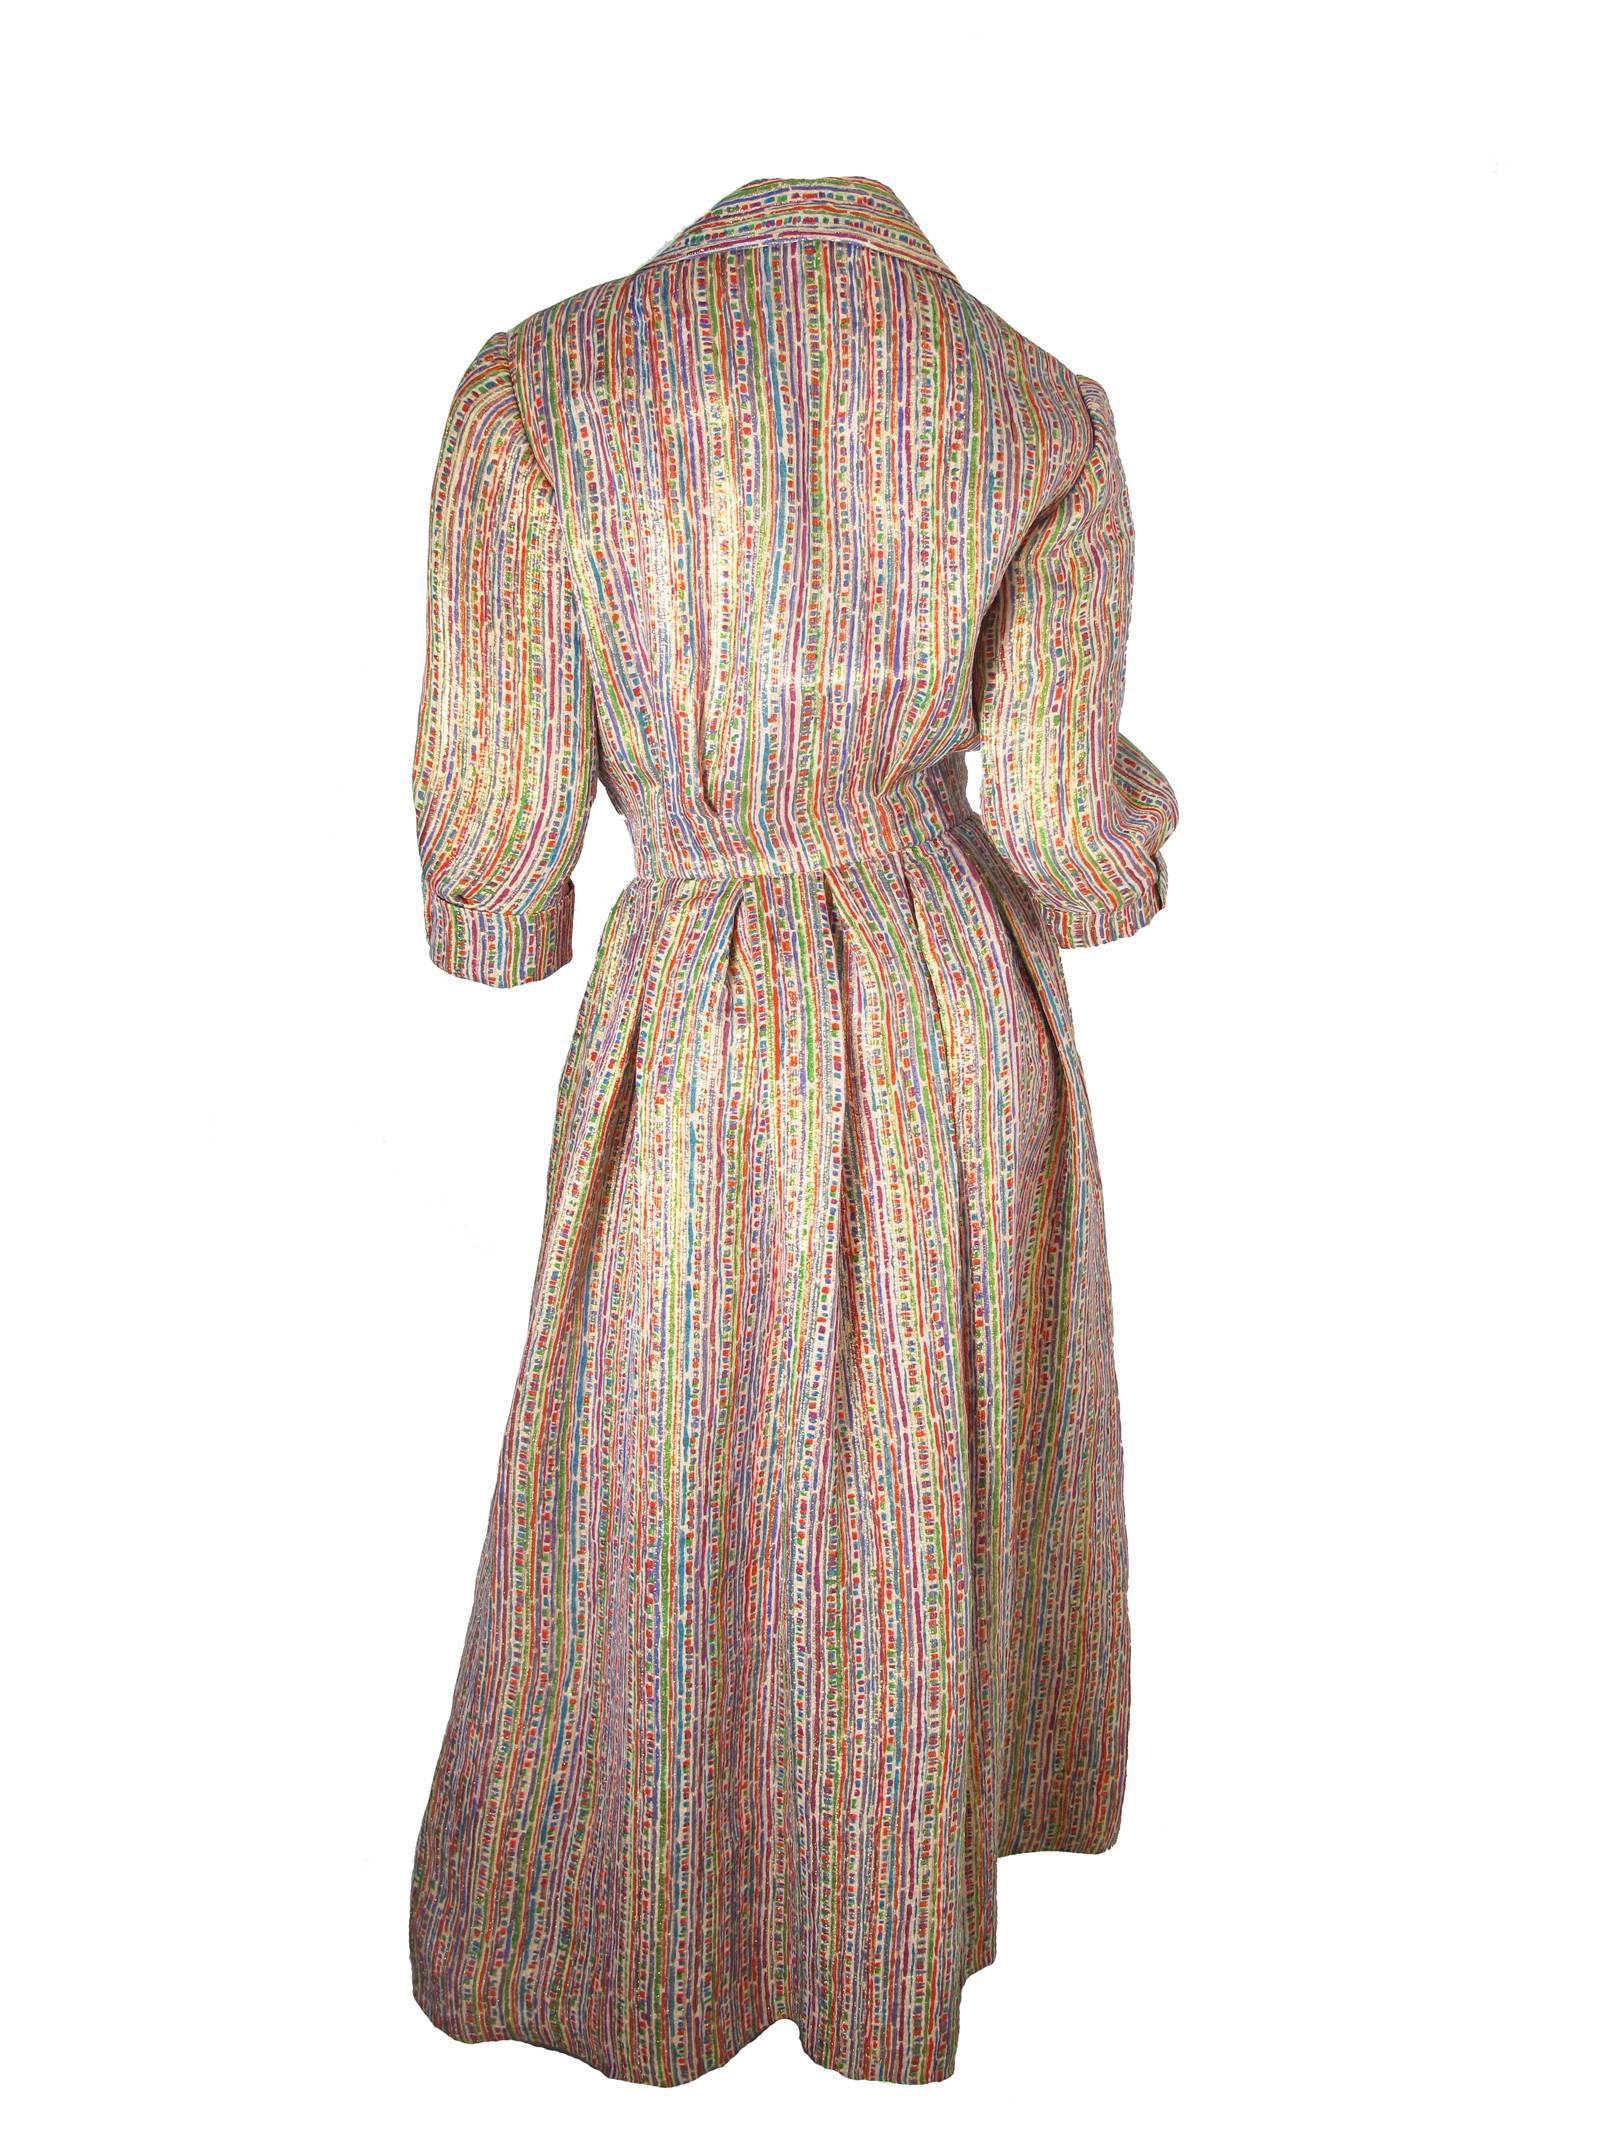 Brown Christian Dior Gold Lame and Multicolored Dress, 1950s 